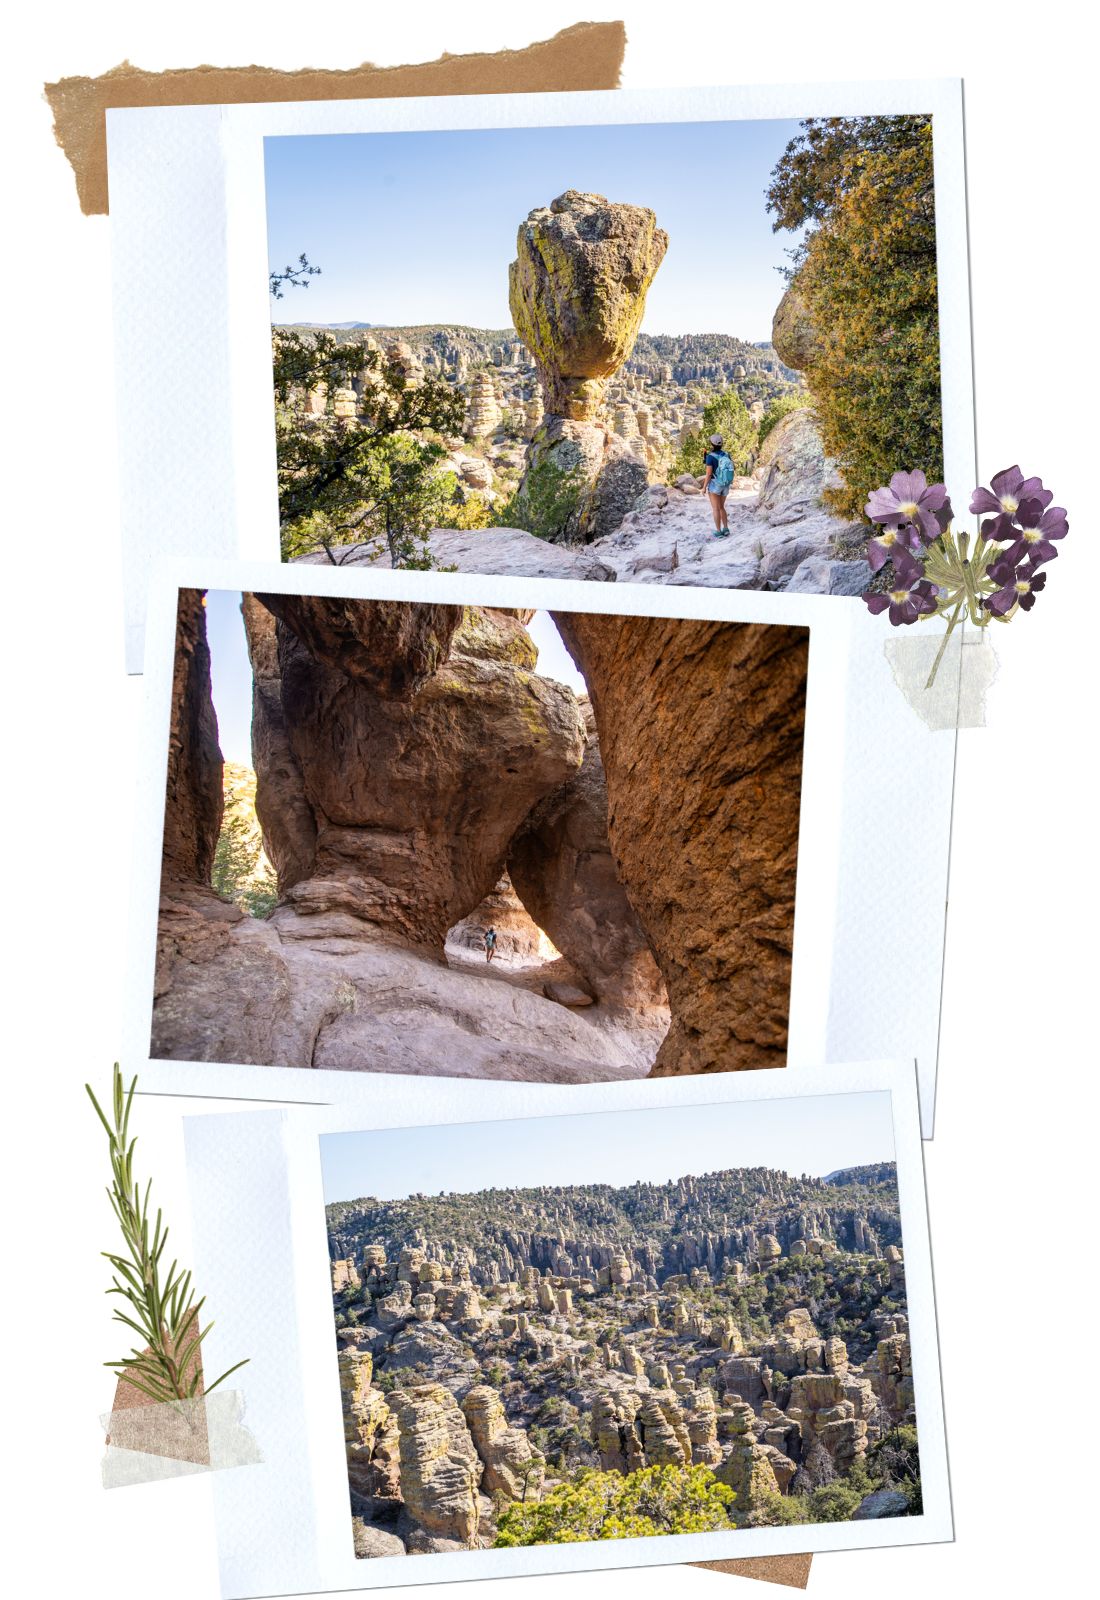 Echo Canyon - Complete Guide for the Scenic Drive in Chiricahua National Monument